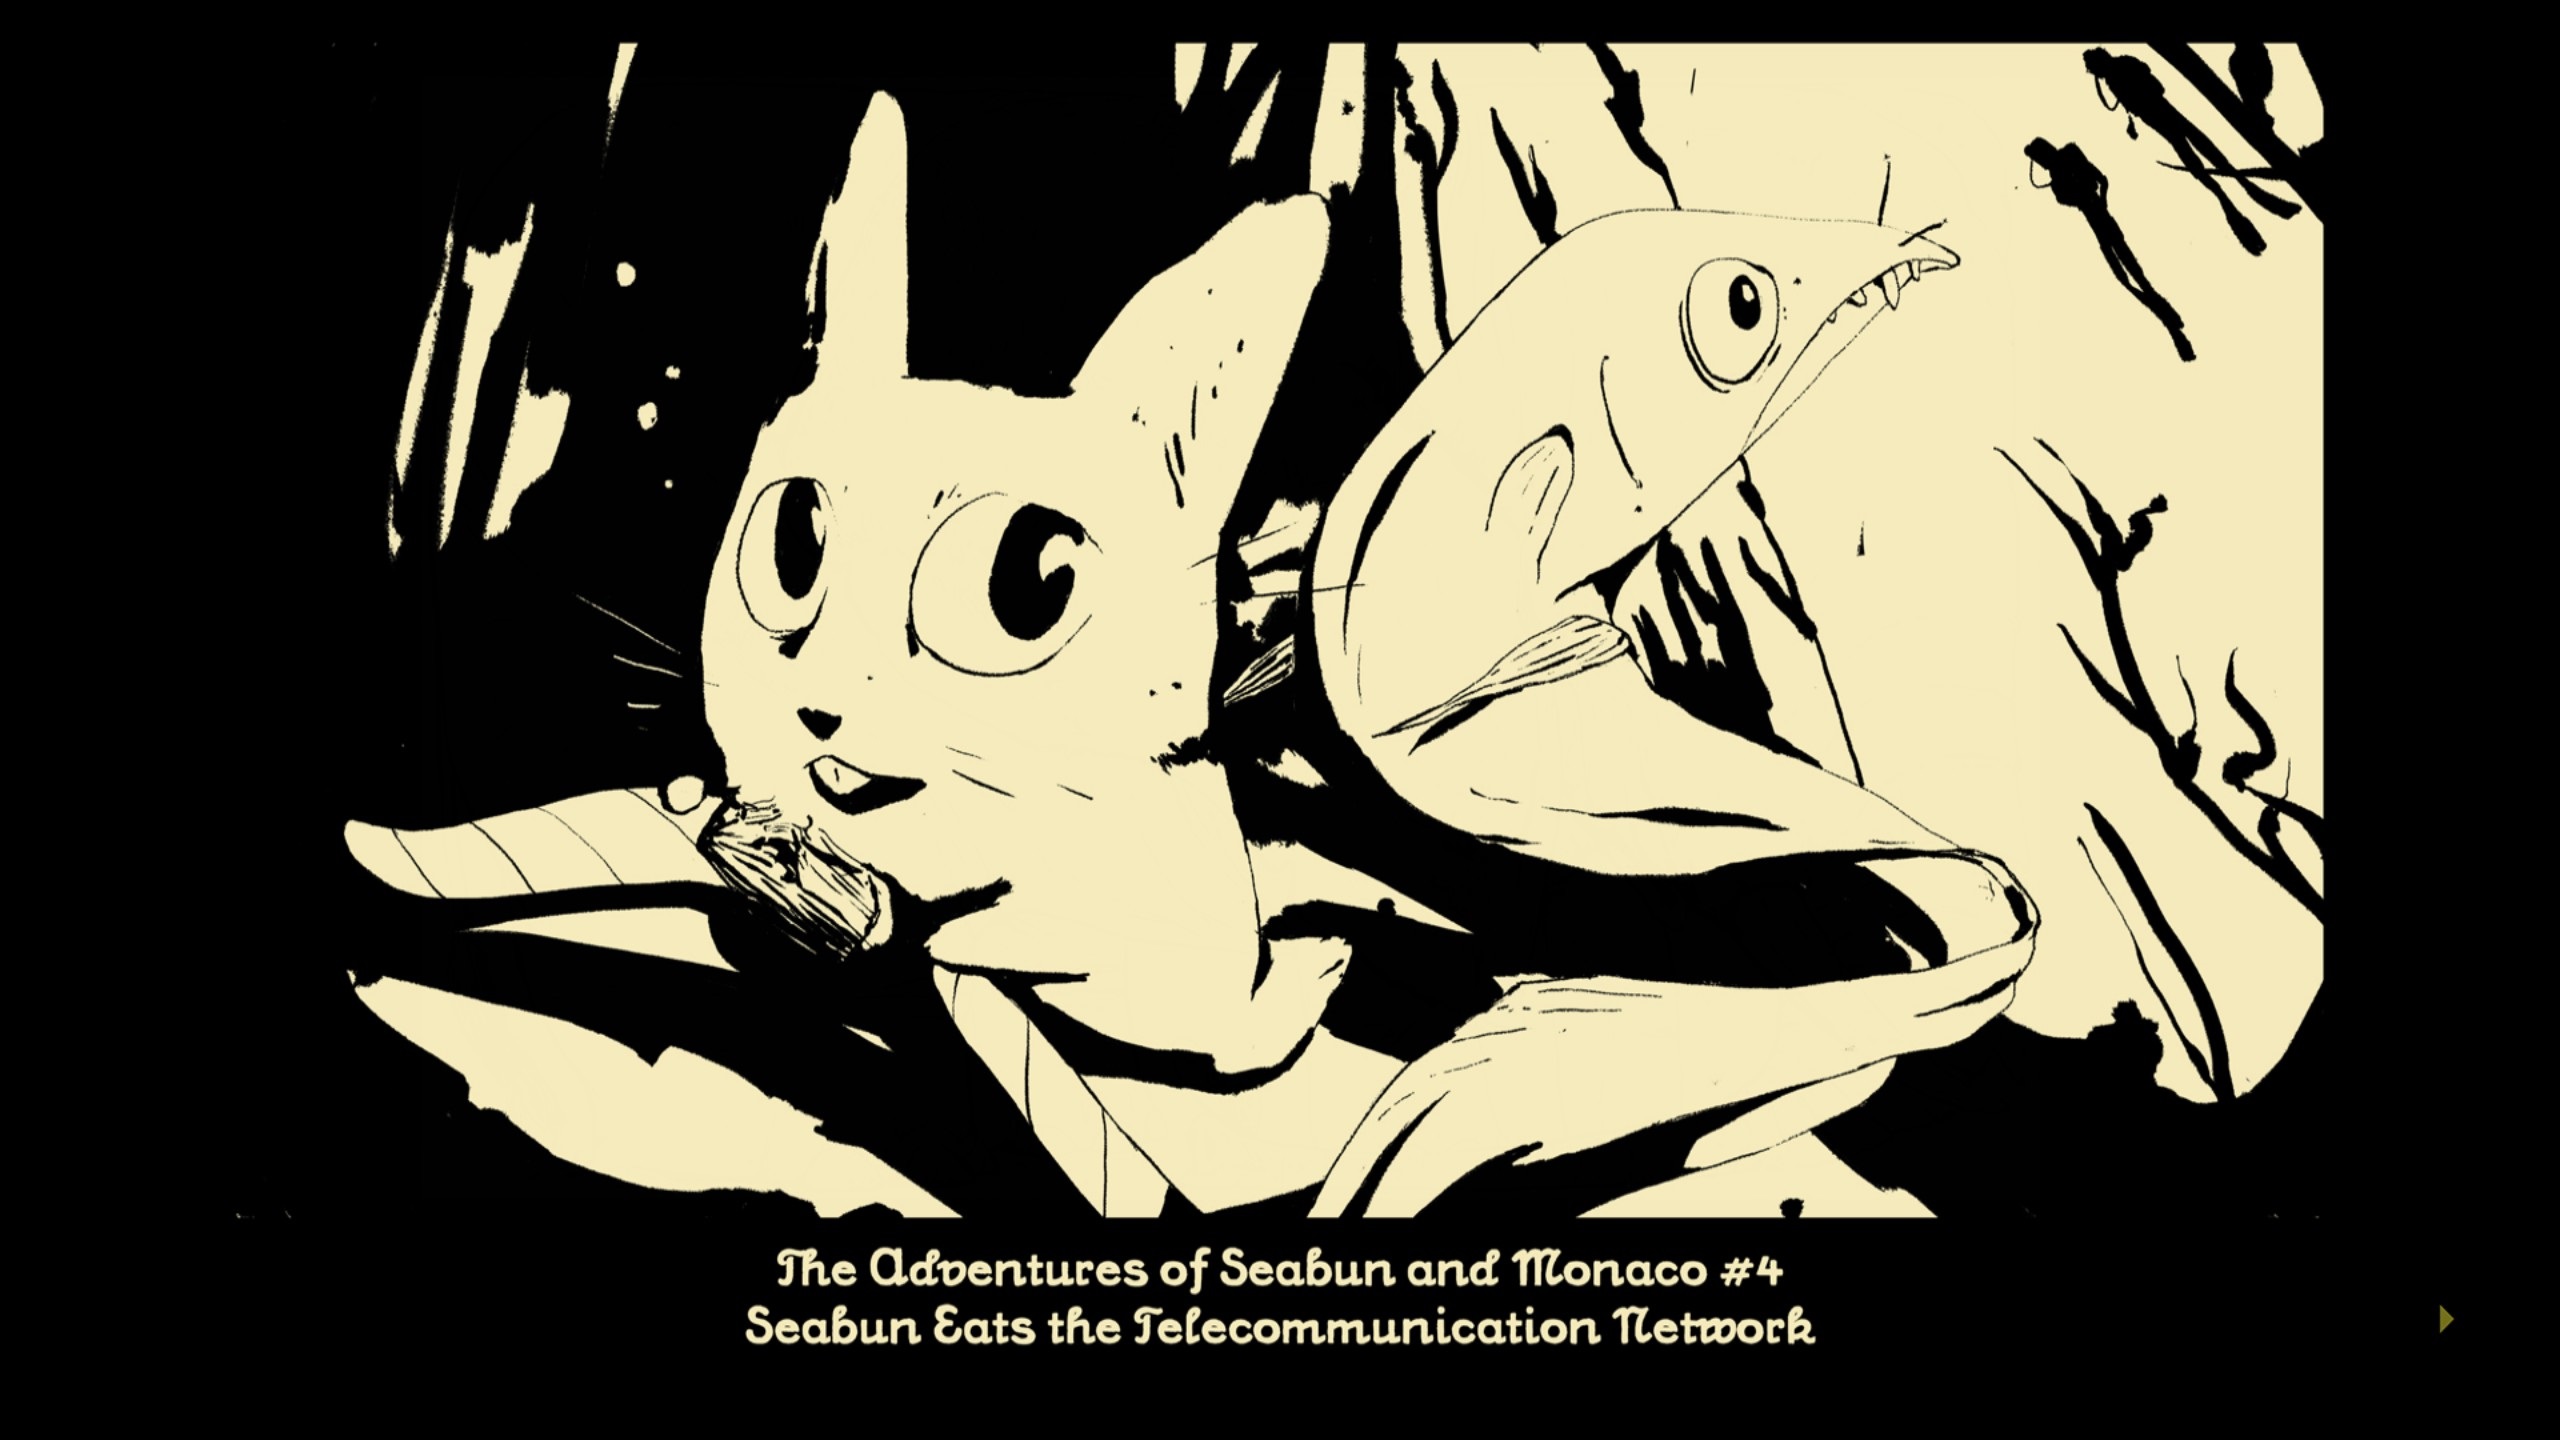 Seabun and fish friend on adventure in black and white